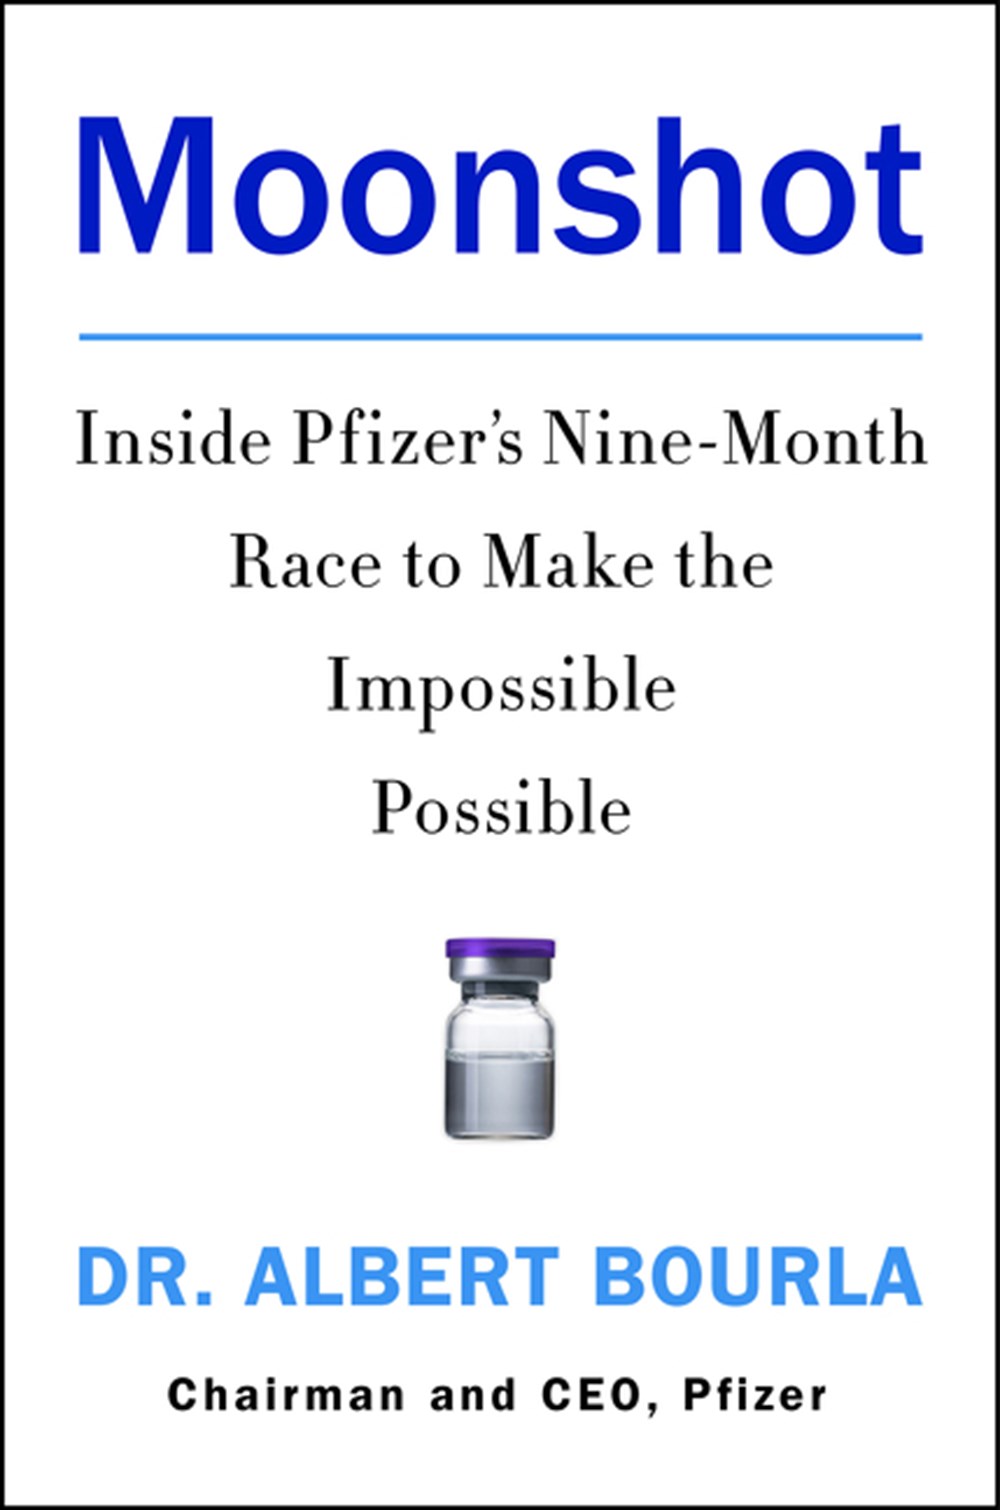 Moonshot Inside Pfizer's Nine-Month Race to Make the Impossible Possible